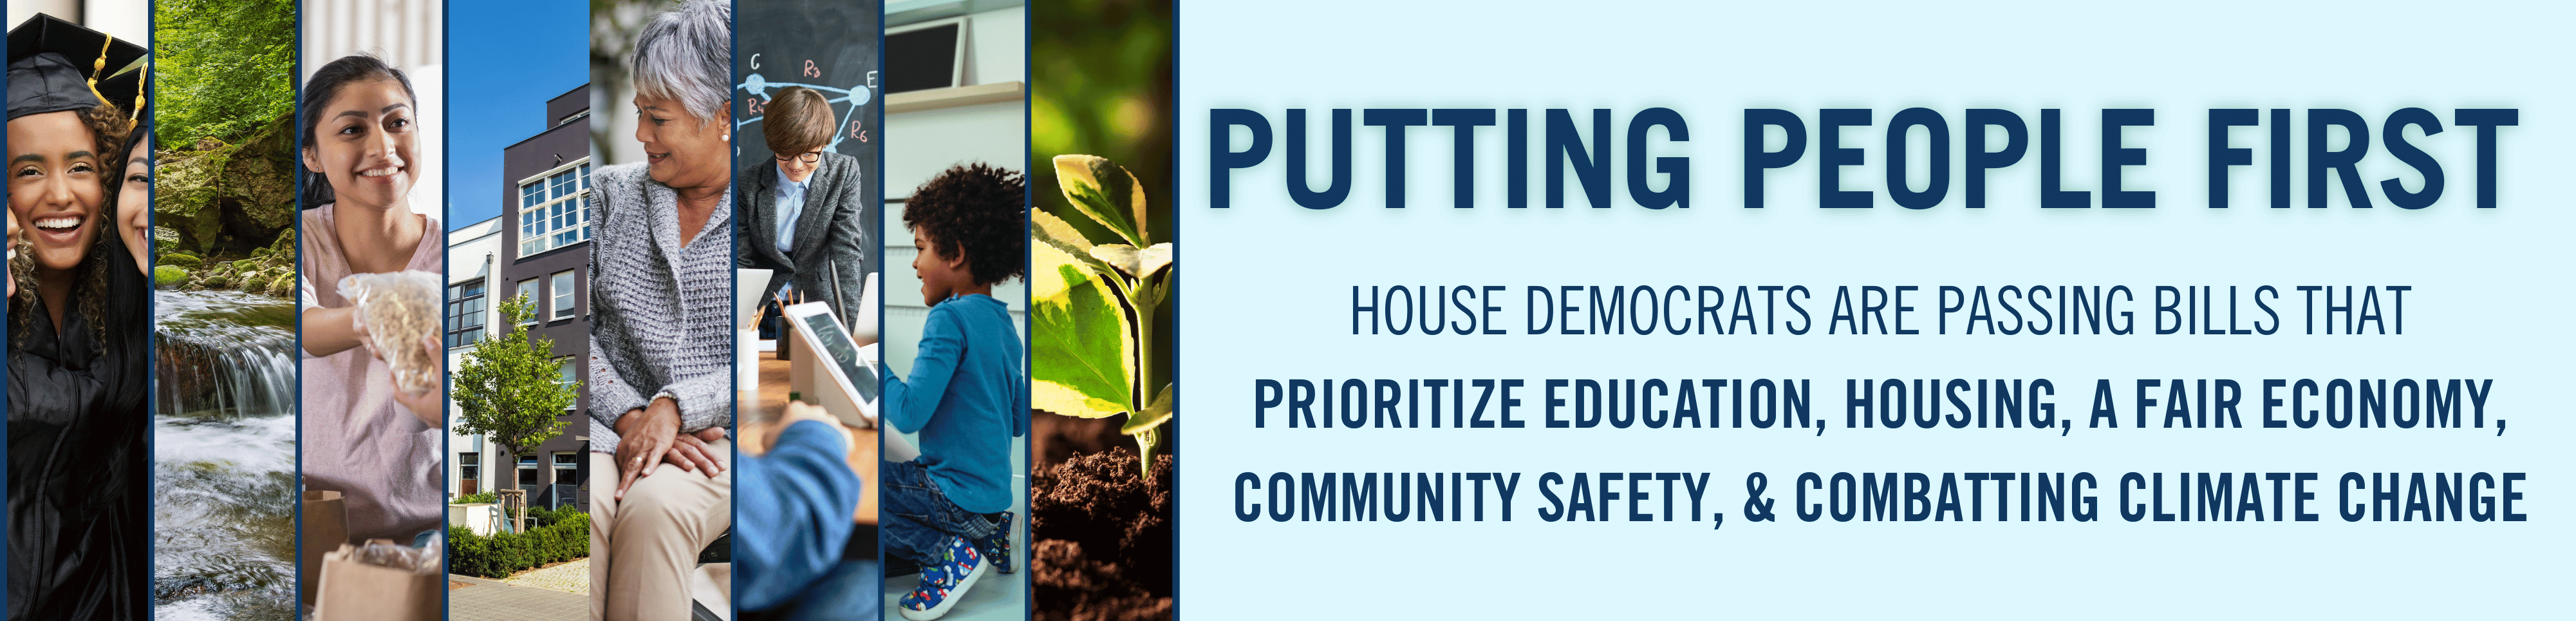 Banner graphic featuring a light blue background with various photos stacked vertically next to each other that reads PUTTING PEOPLE FIRST and then beneath that HOUSE DEMOCRATS ARE PASSING BILLS THAT
PRIORITIZE EDUCATION, HOUSING, A FAIR ECONOMY, COMMUNITY SAFETY, & COMBATTING CLIMATE CHANGE